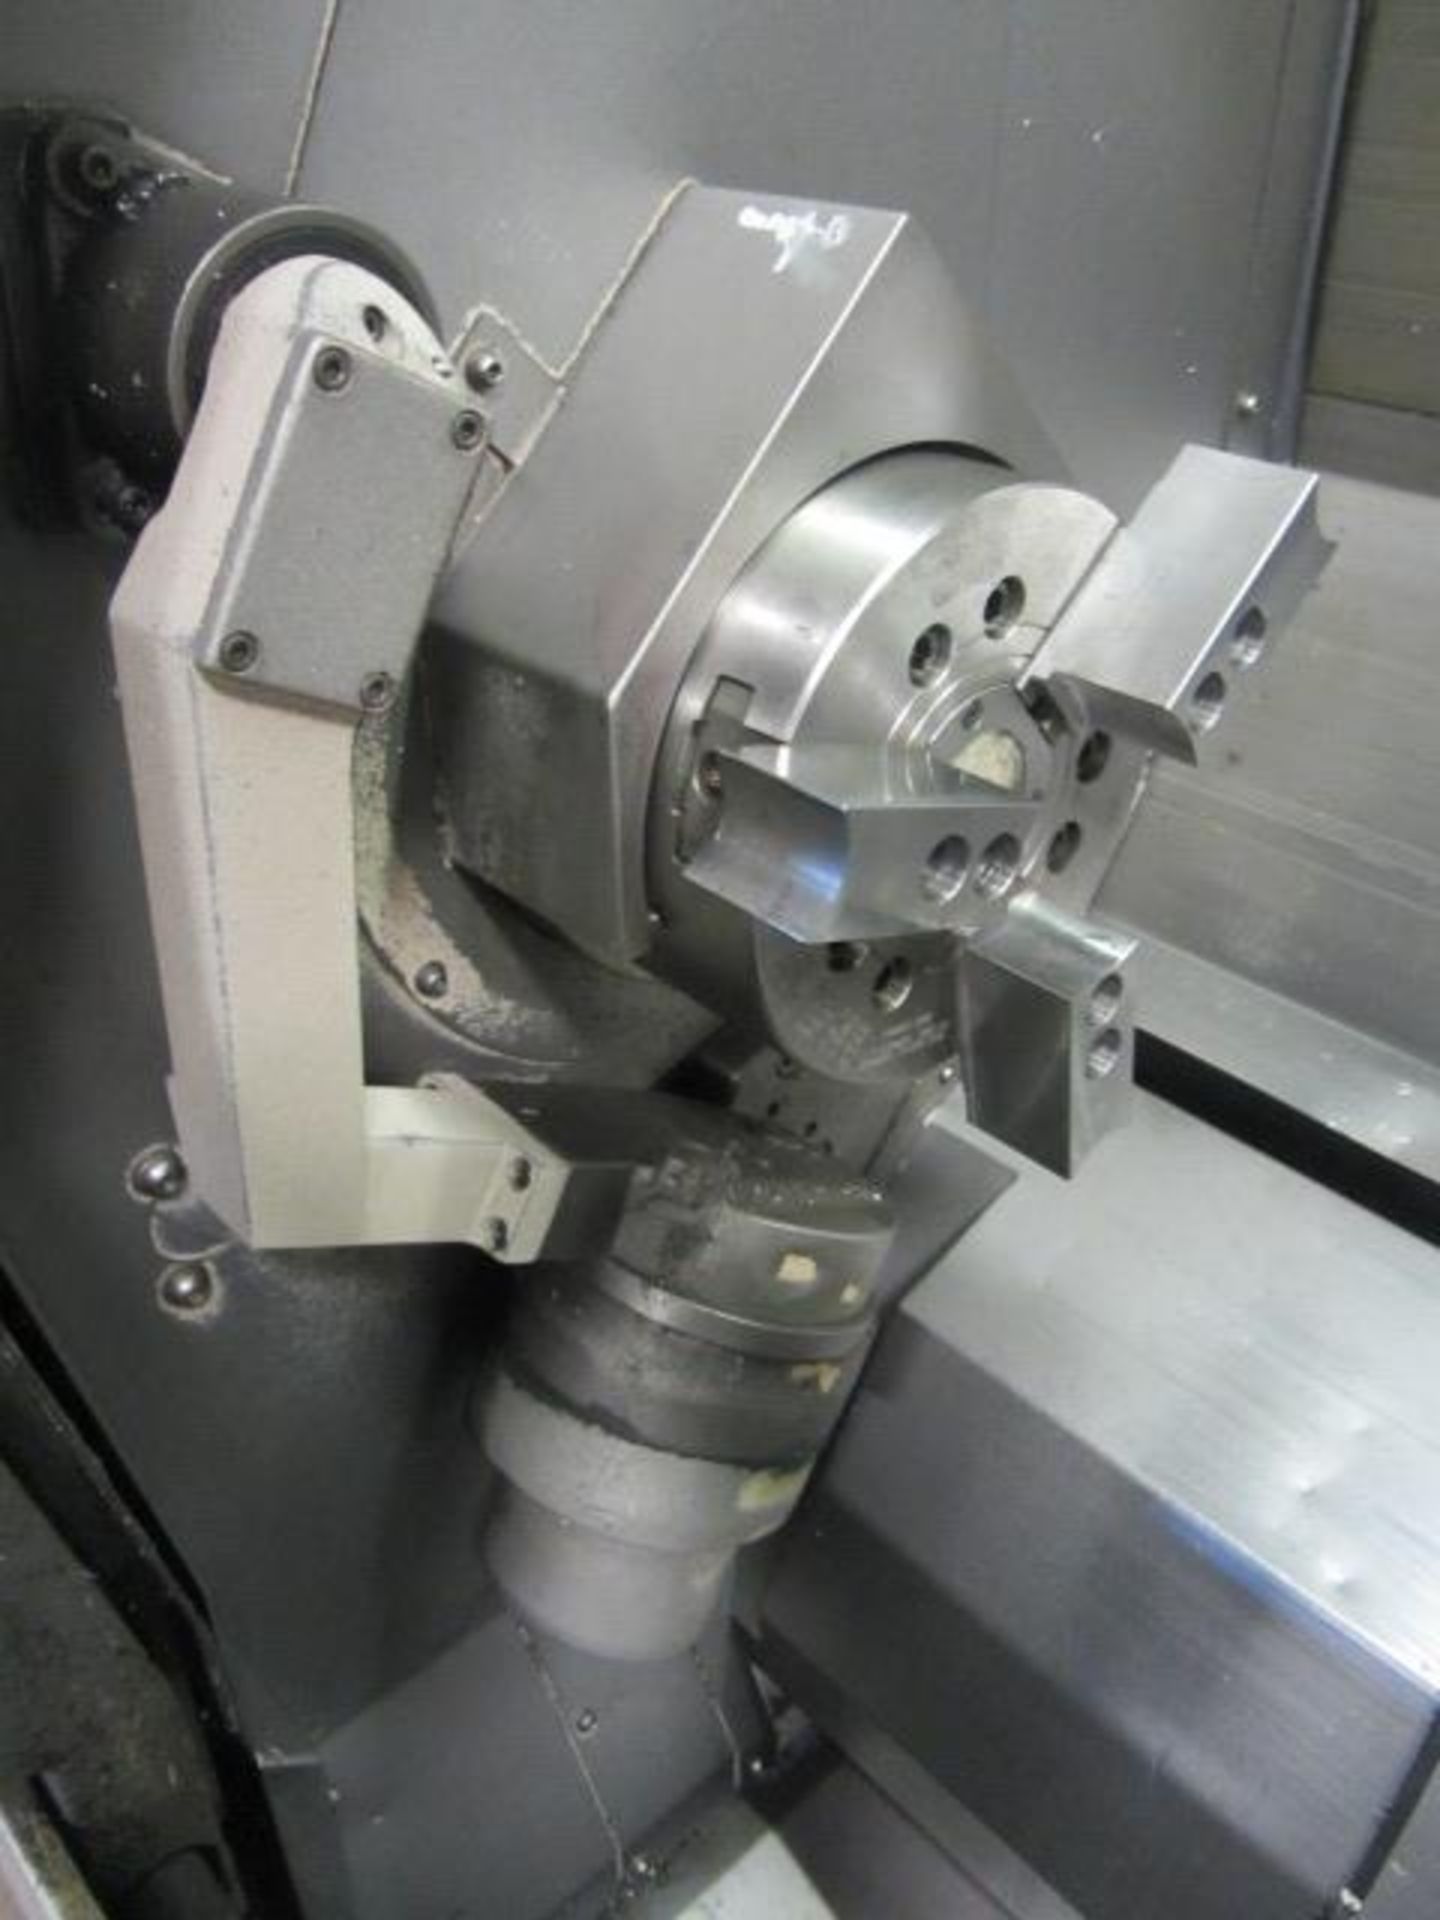 Mazak Integrex 200SY CNC Turning Center with Sub-Spindle, Milling & Y-Axis, 8'' Chuck on Main - Image 5 of 9